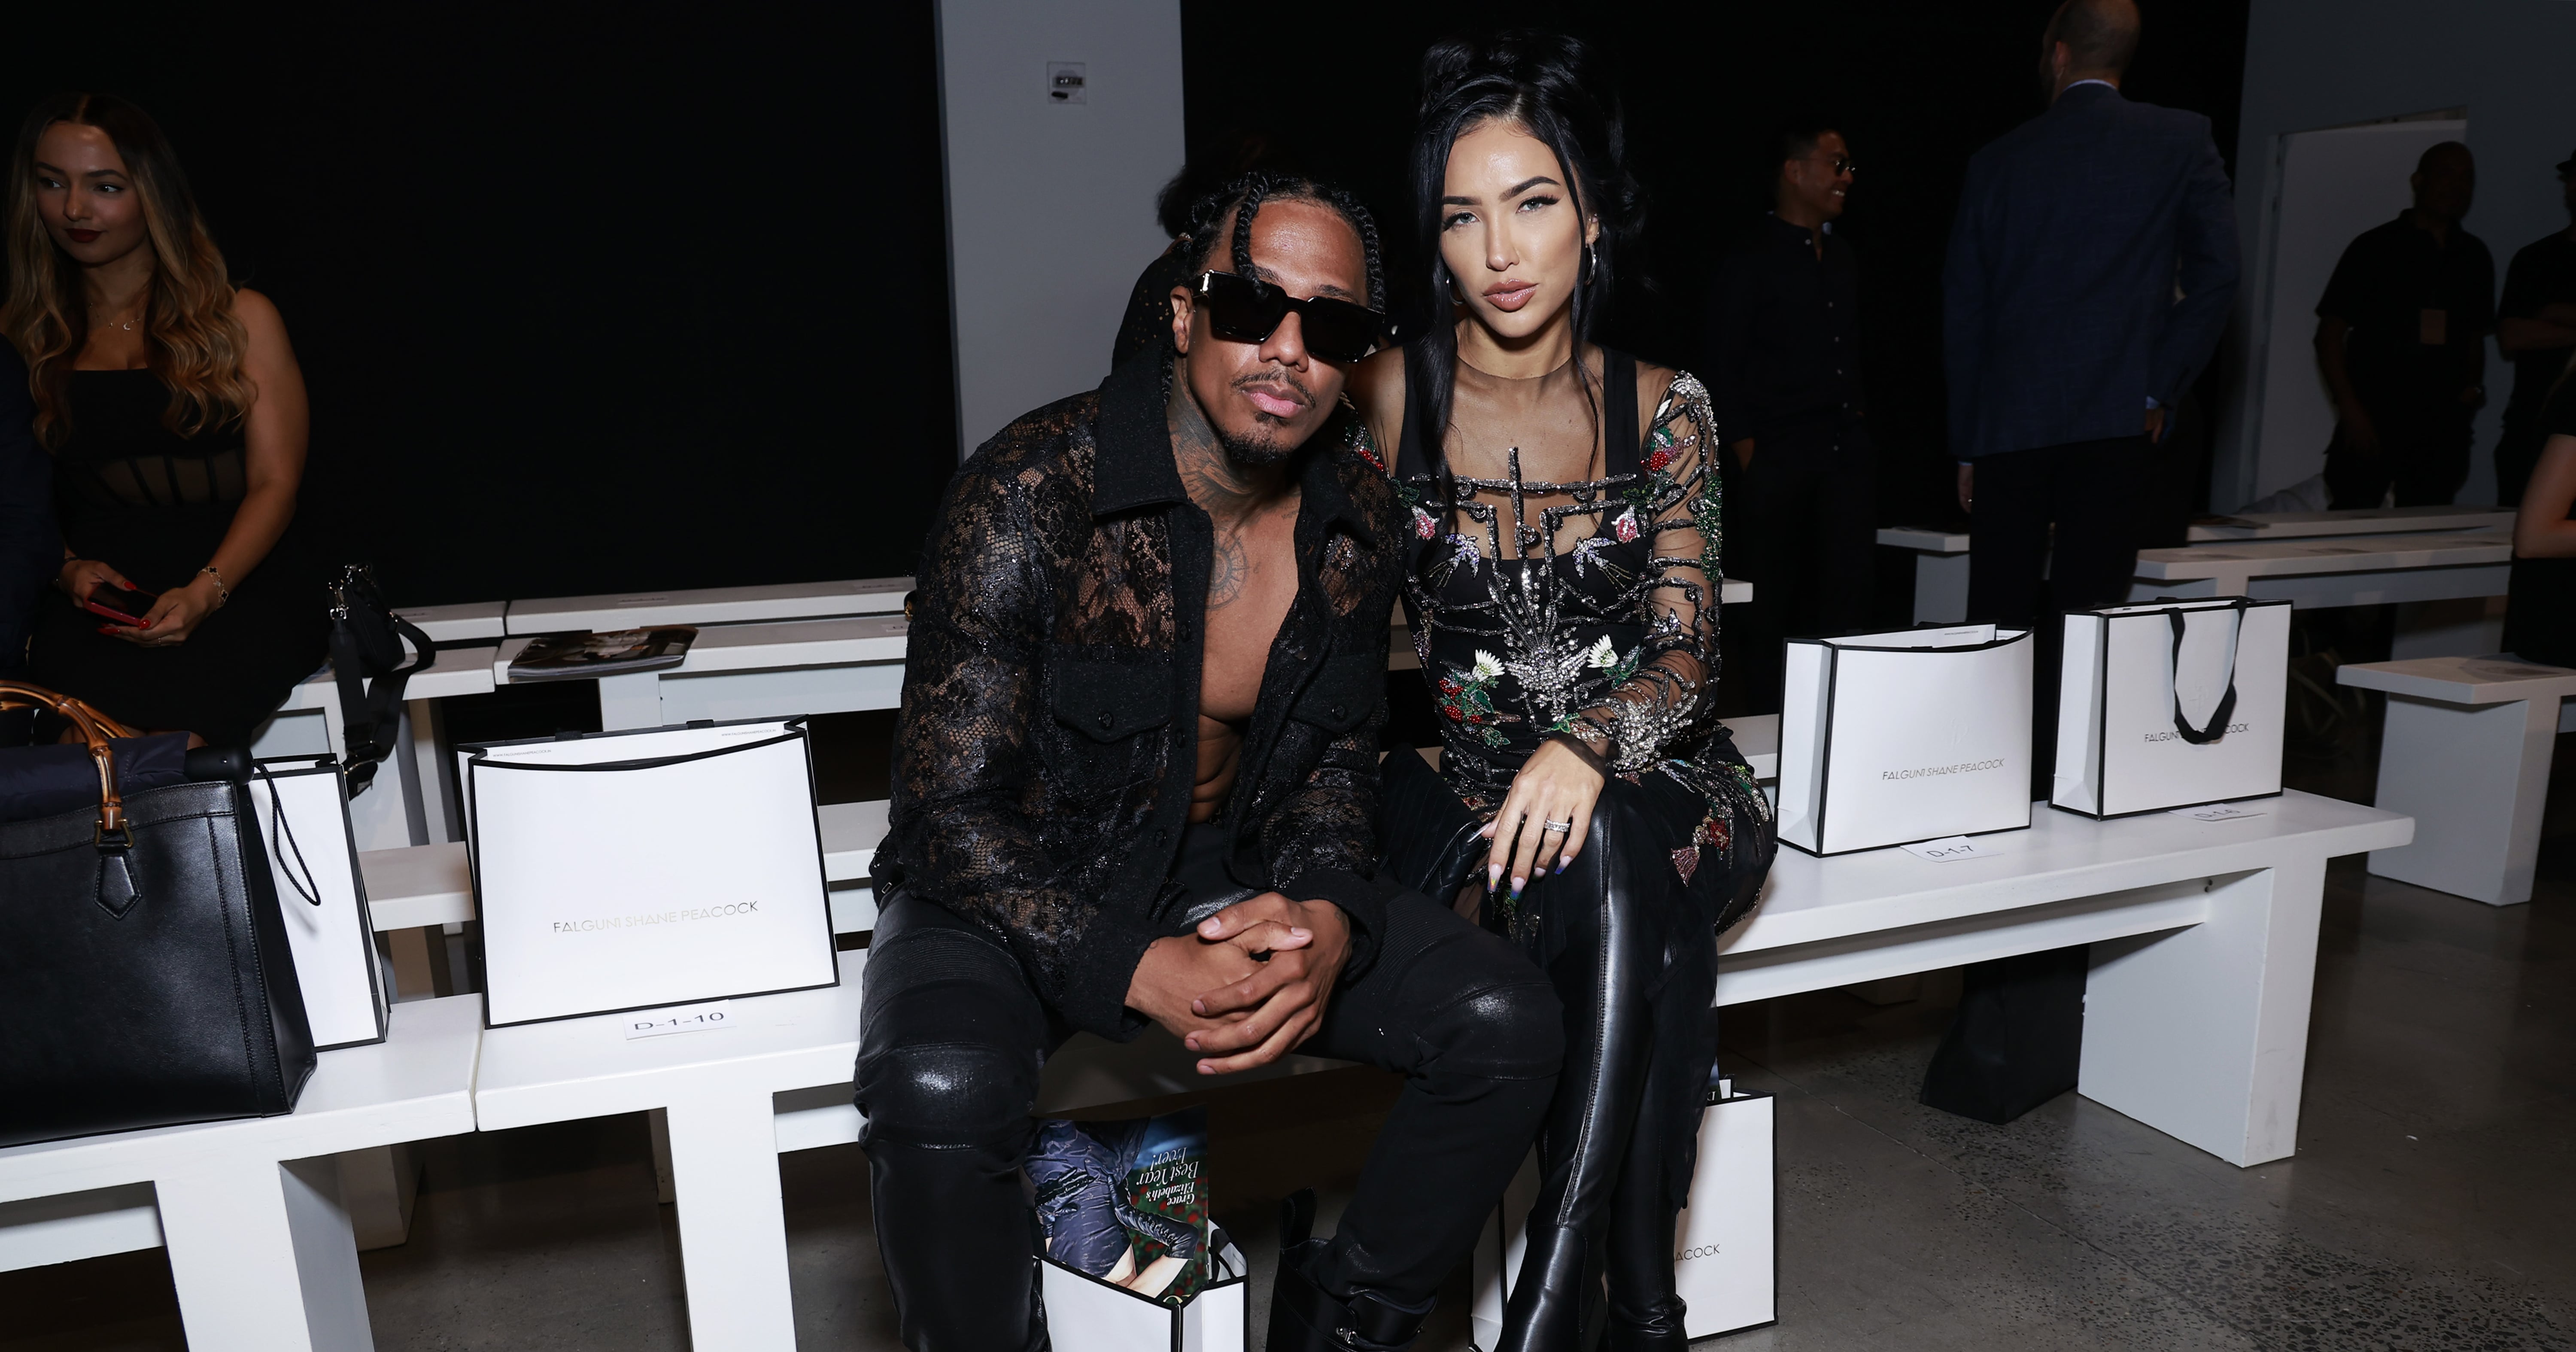 Parents Nick Cannon and Bre Tiesi Together at New York Fashion Week